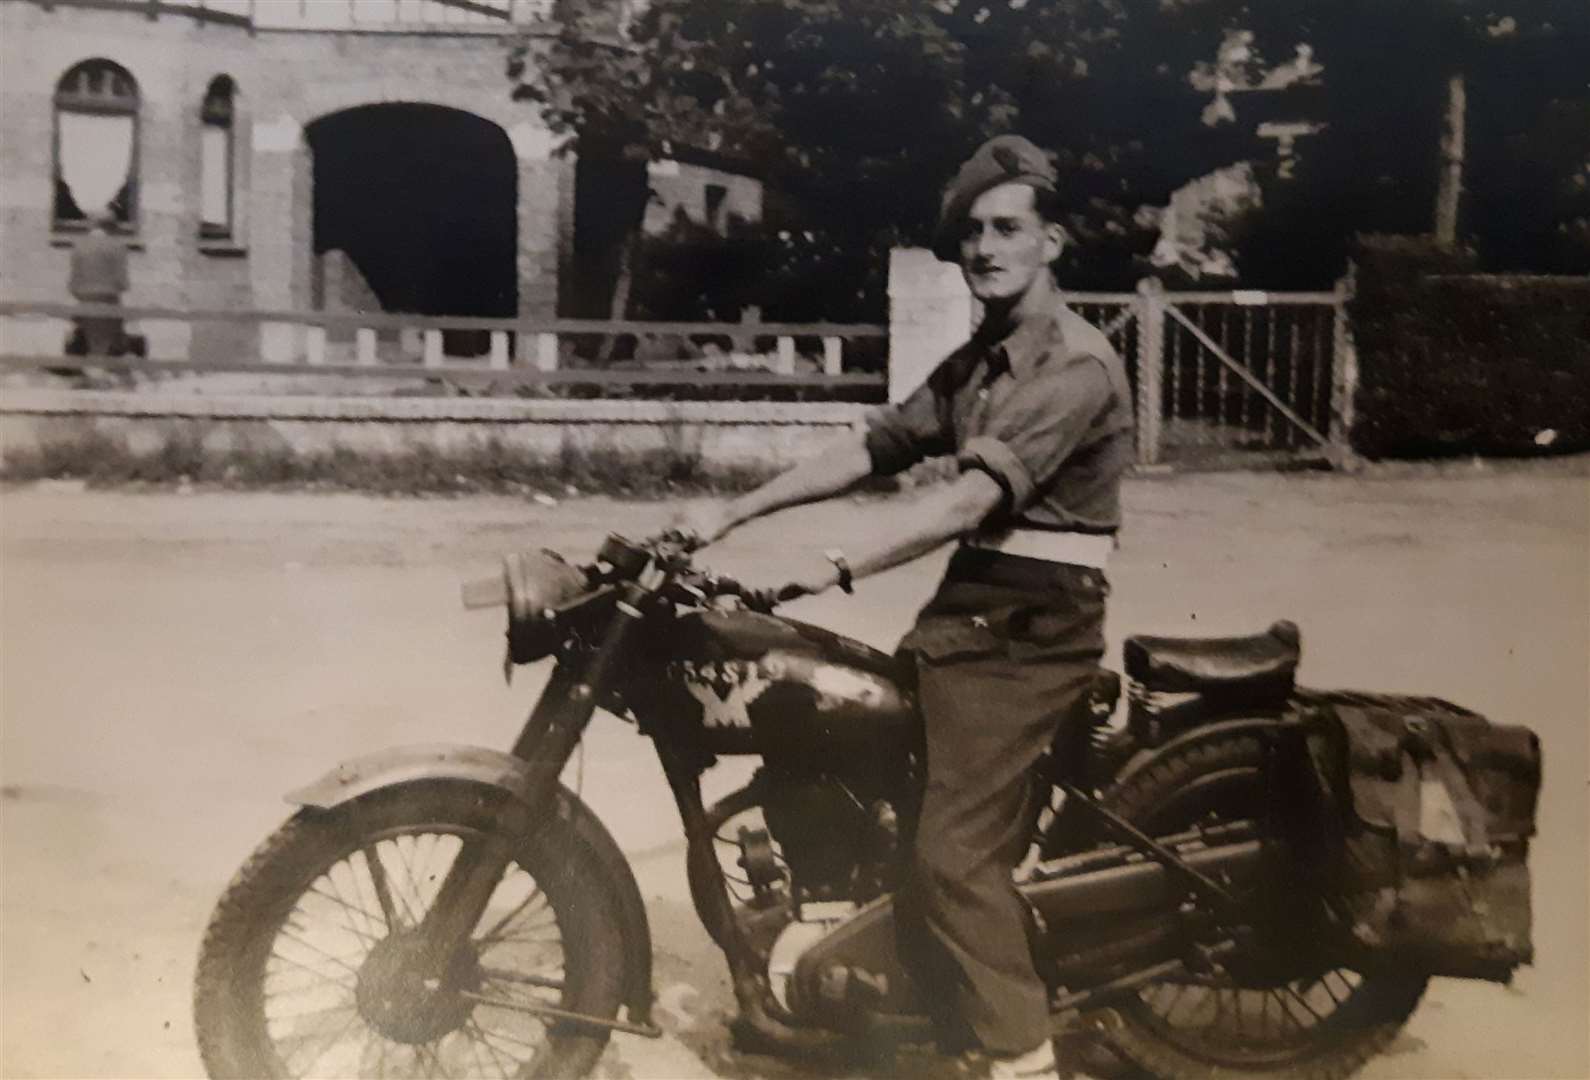 John Stokes on a borrowed motorbike during his army days